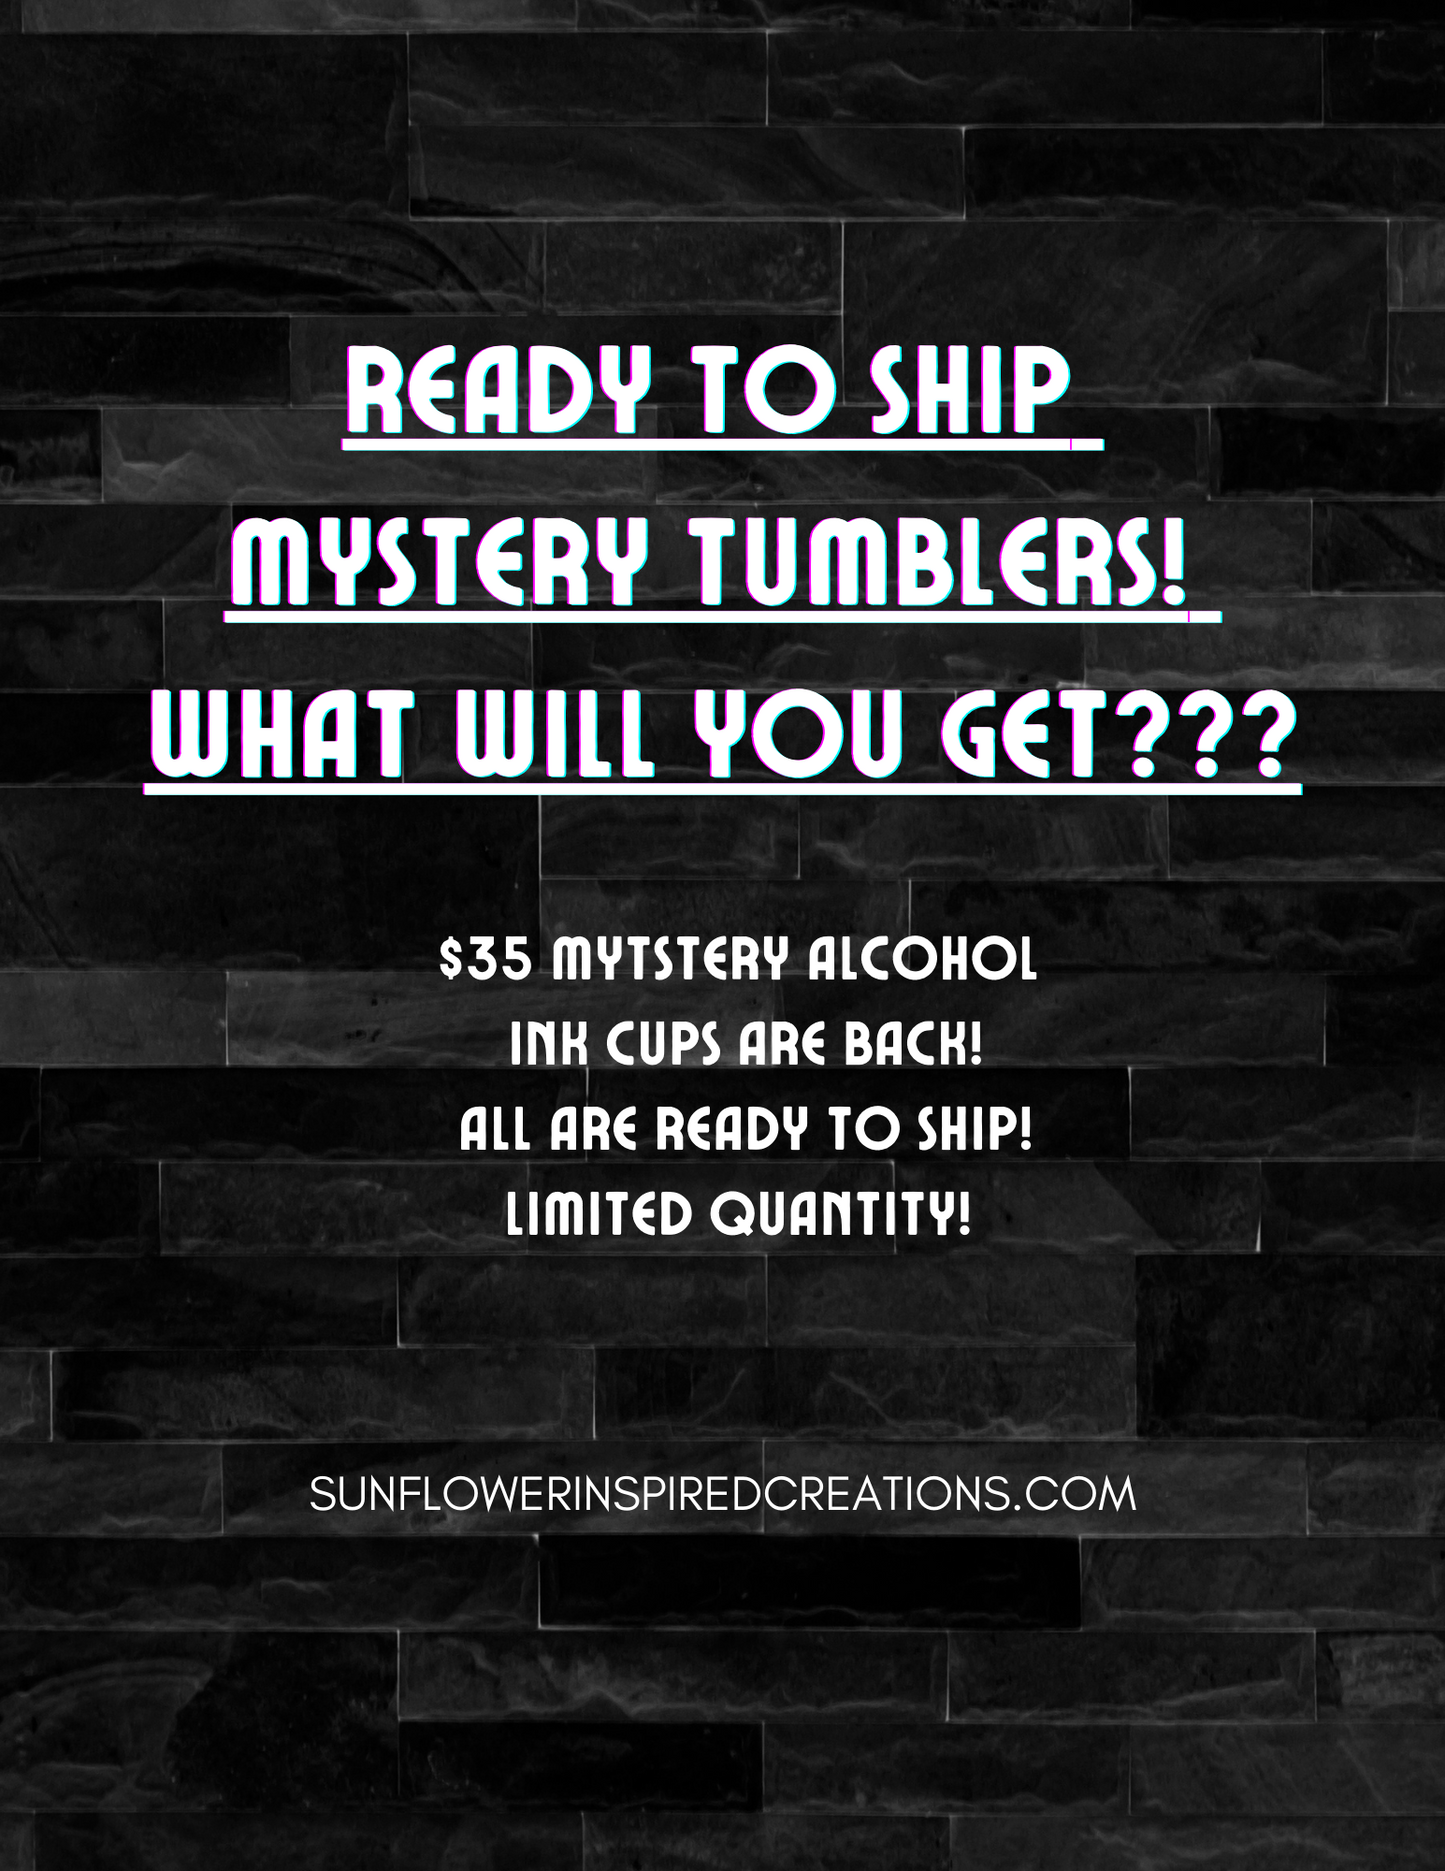 READY TO SHIP MYSTERY TUMBLERS ARE BACK!